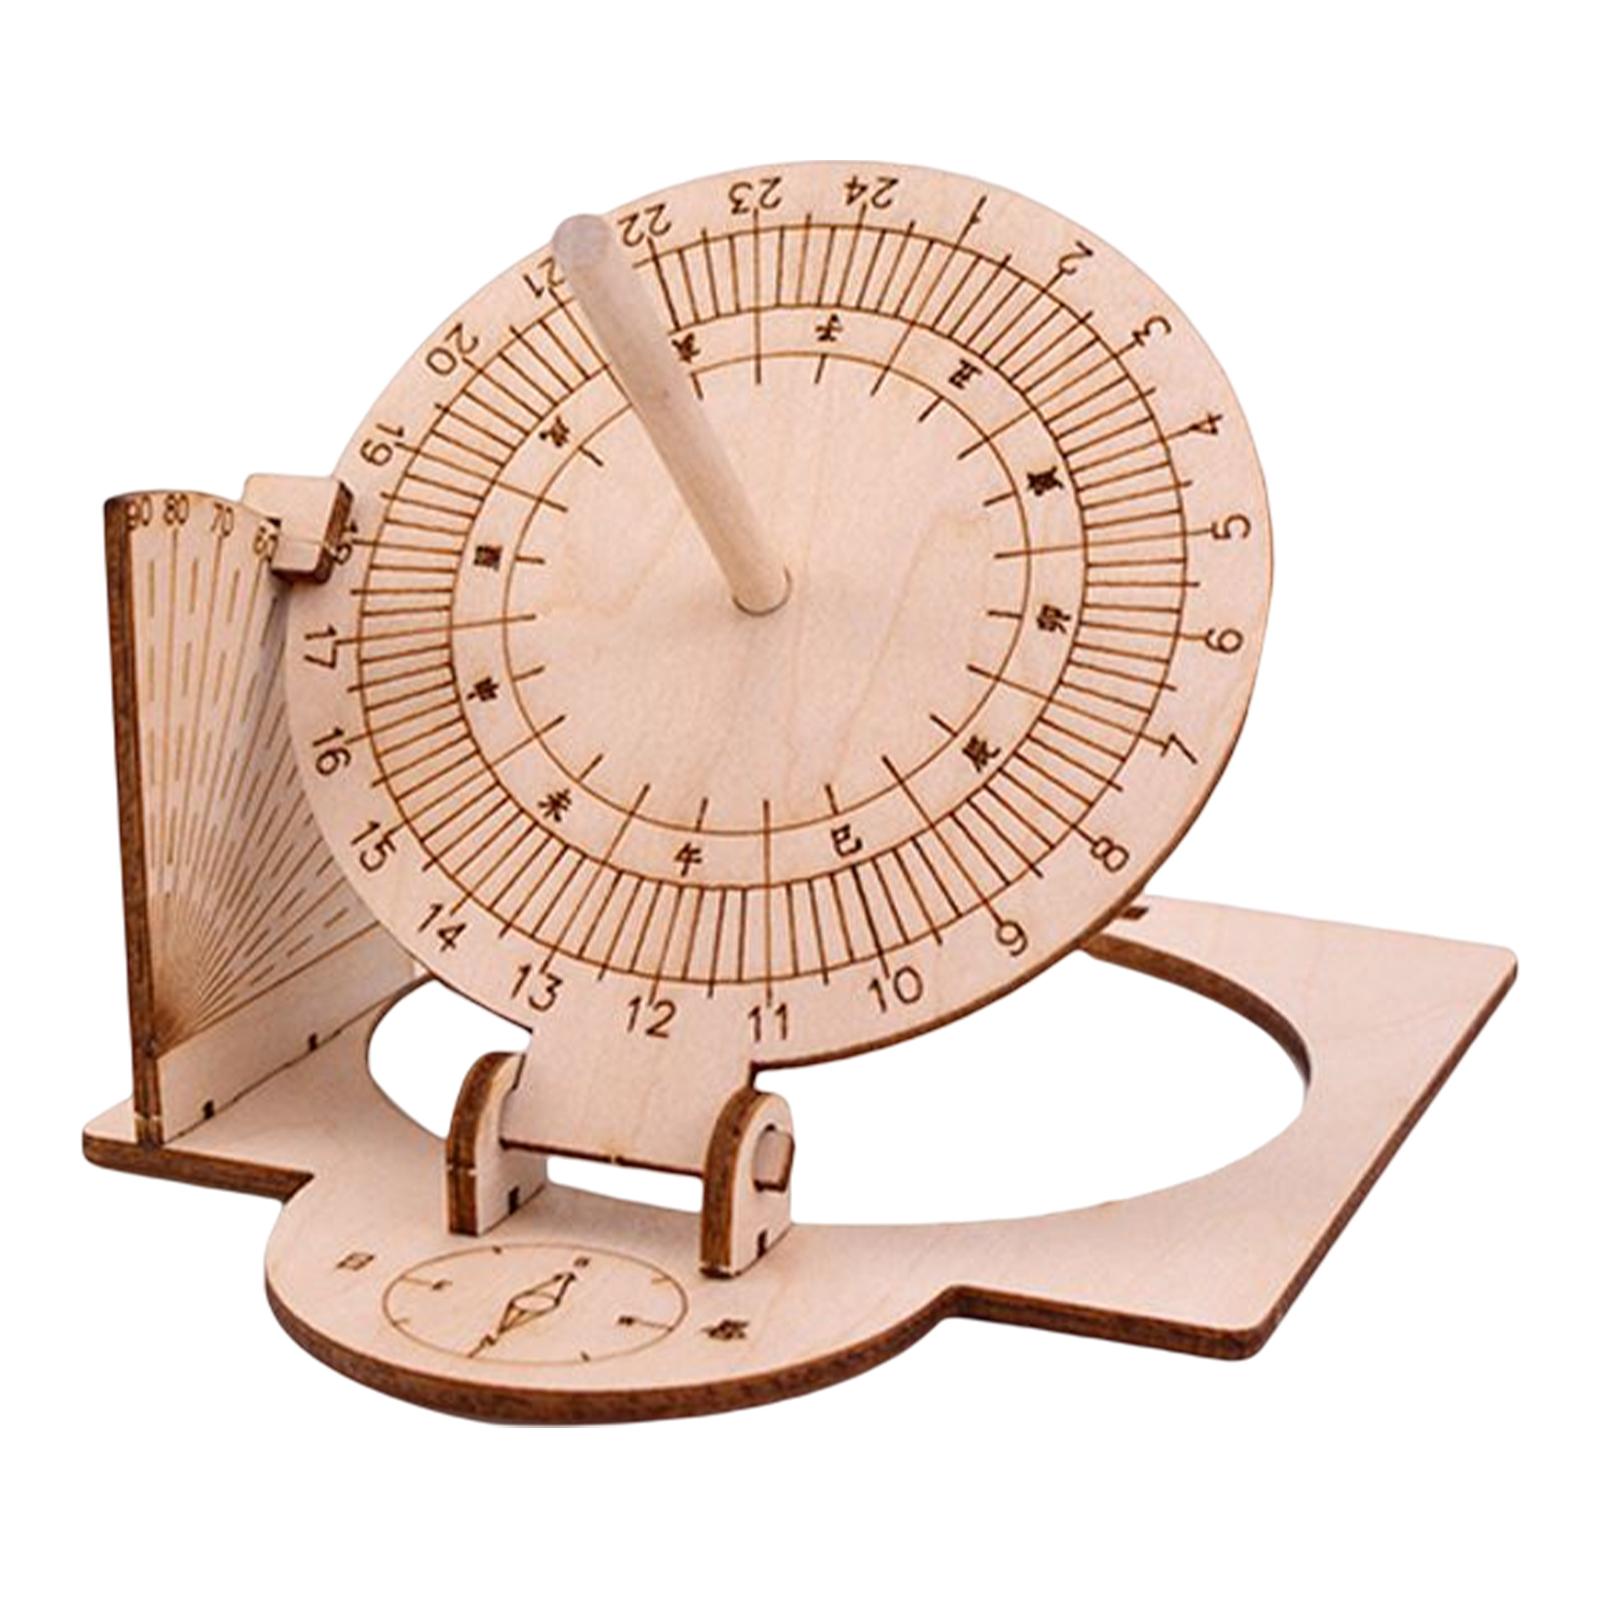 Equatorial Sundial Clock DIY Wooden Building for Adults and Children Experiment Equipment Durable Manual Assembly Model Teaching Aid - image 1 of 6